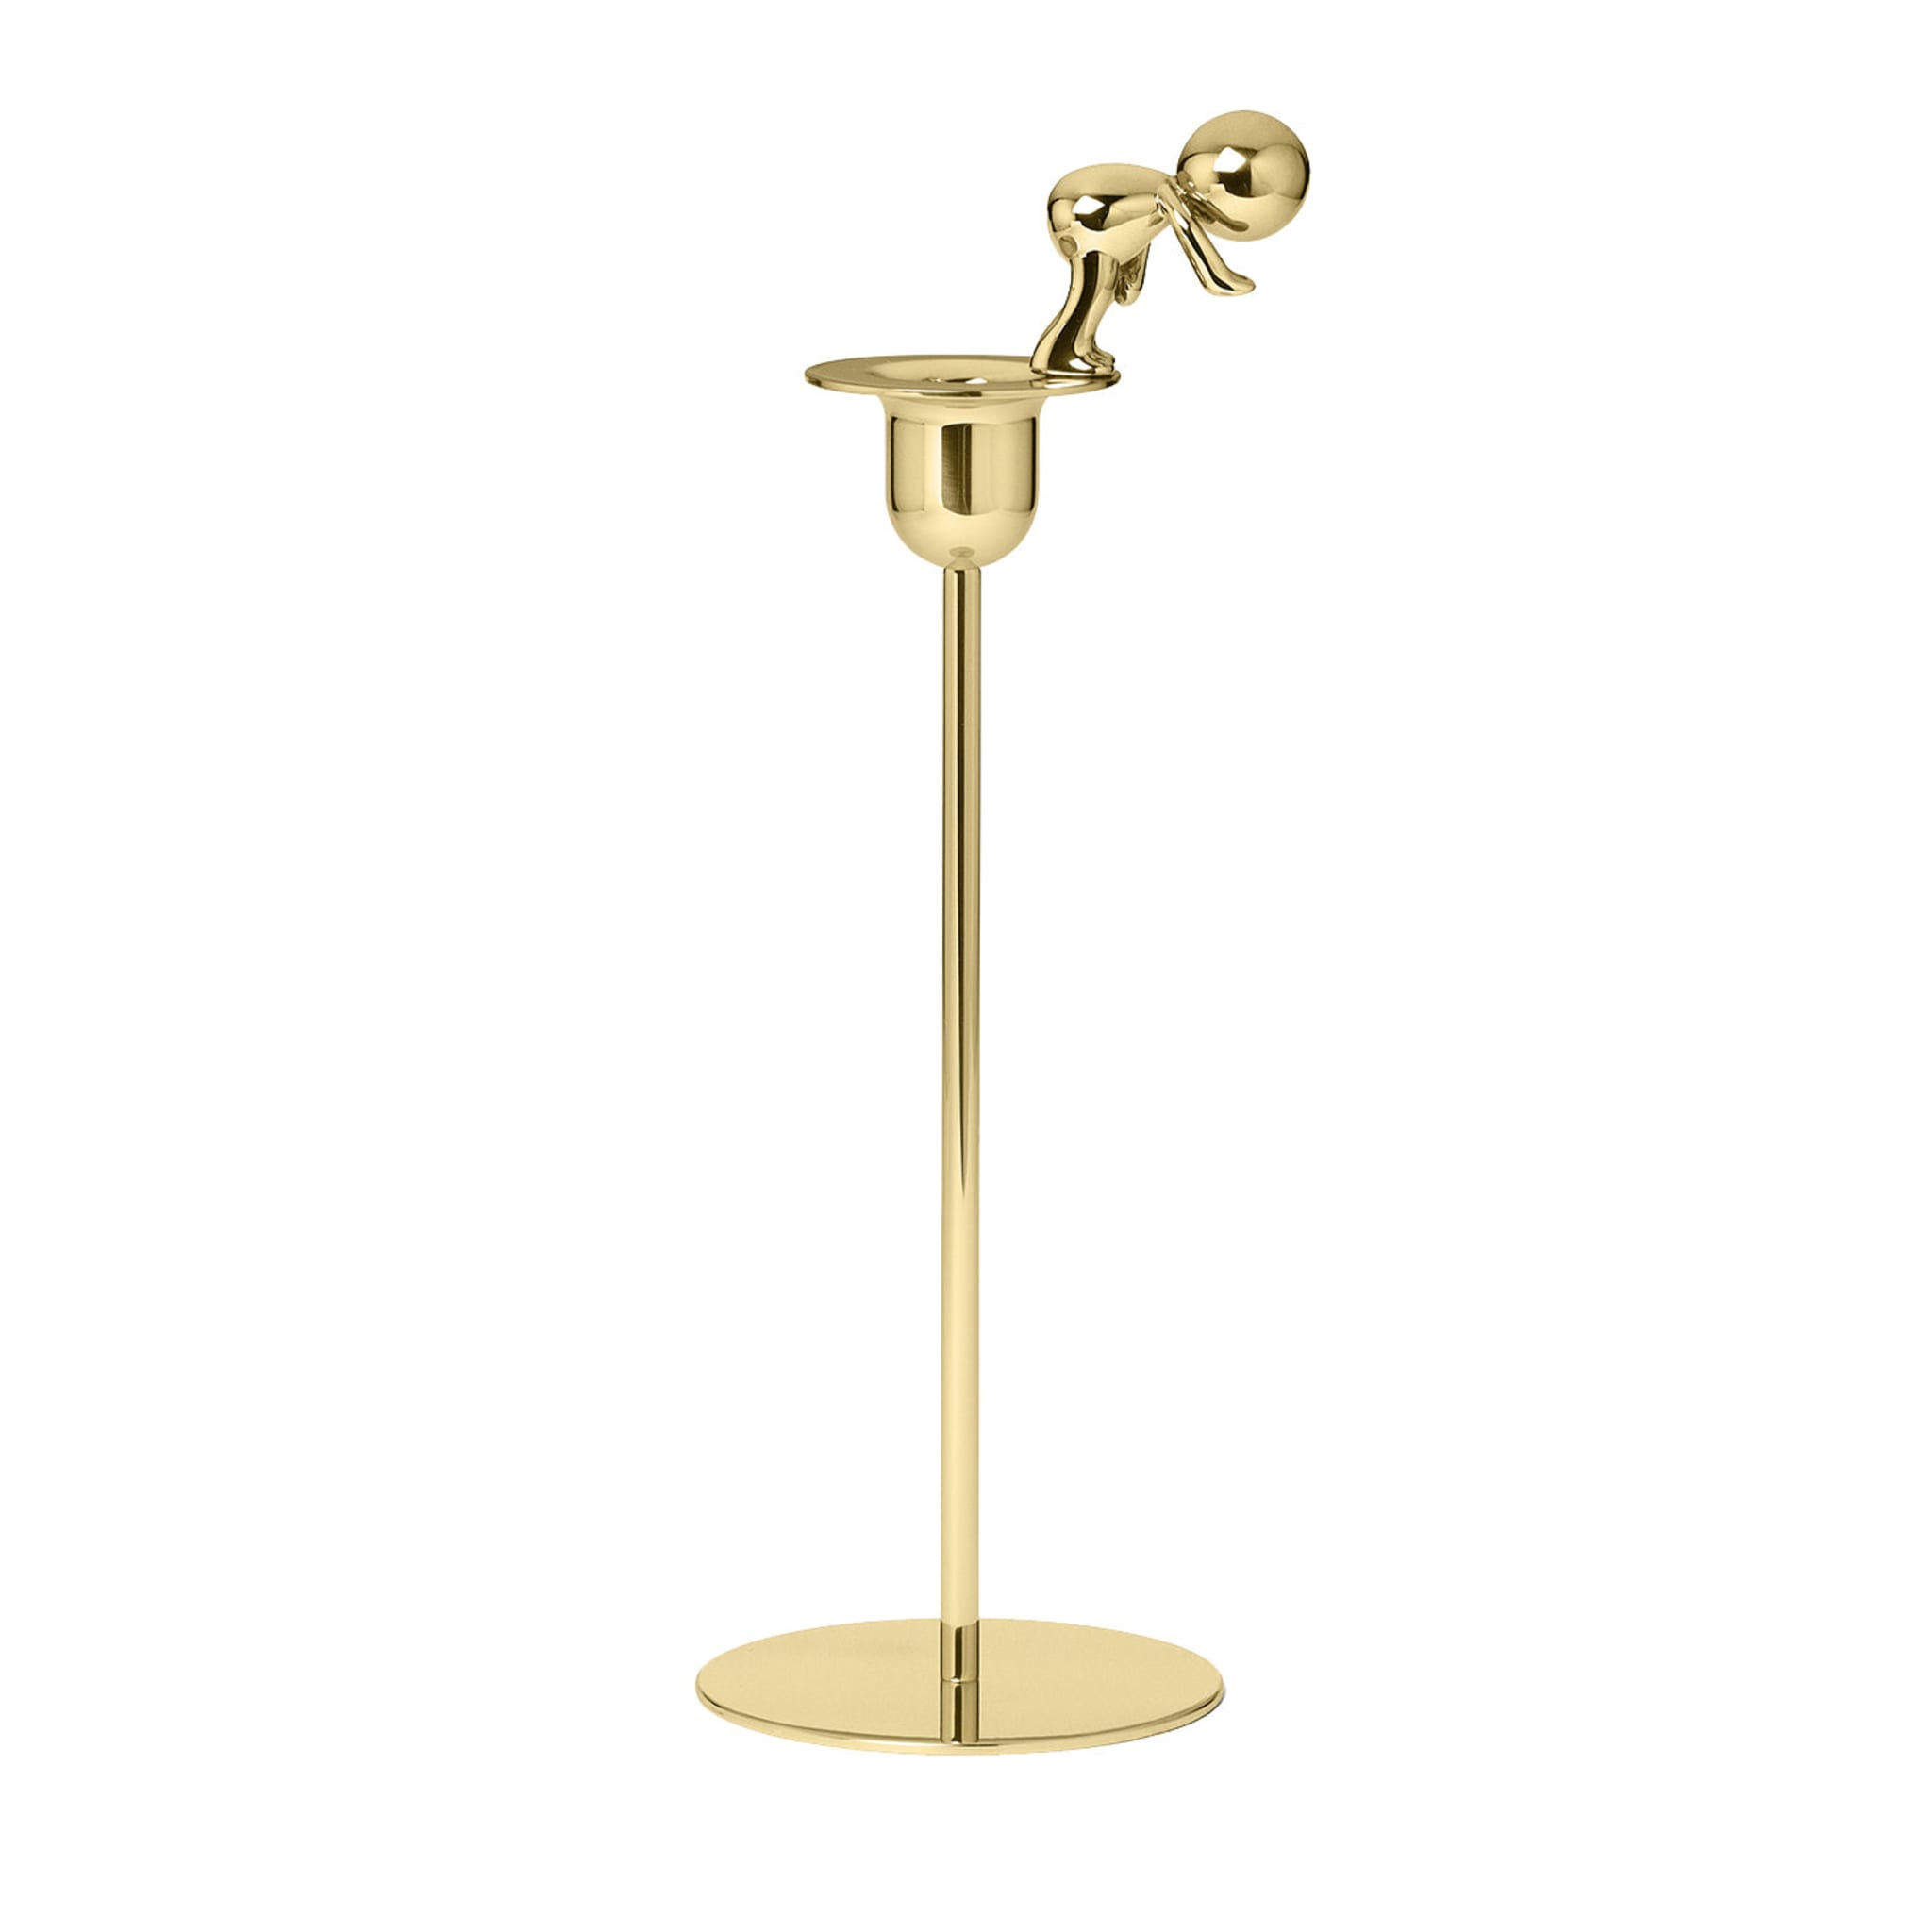 Omini Diver Tall Candlestick in Polished Brass By Stefano Giovannoni - Main view